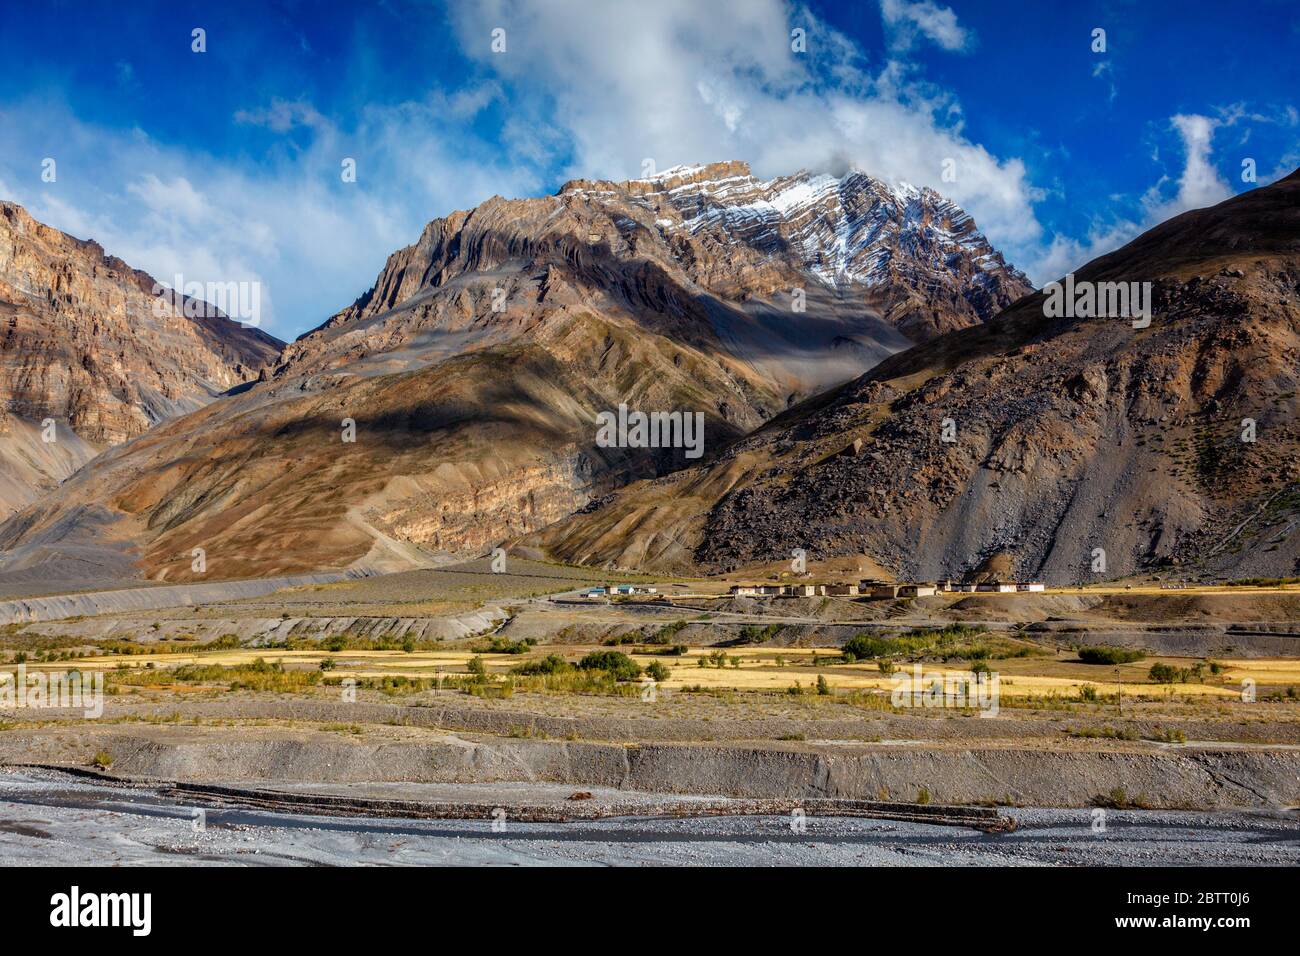 Village in Himalayas Stock Photo